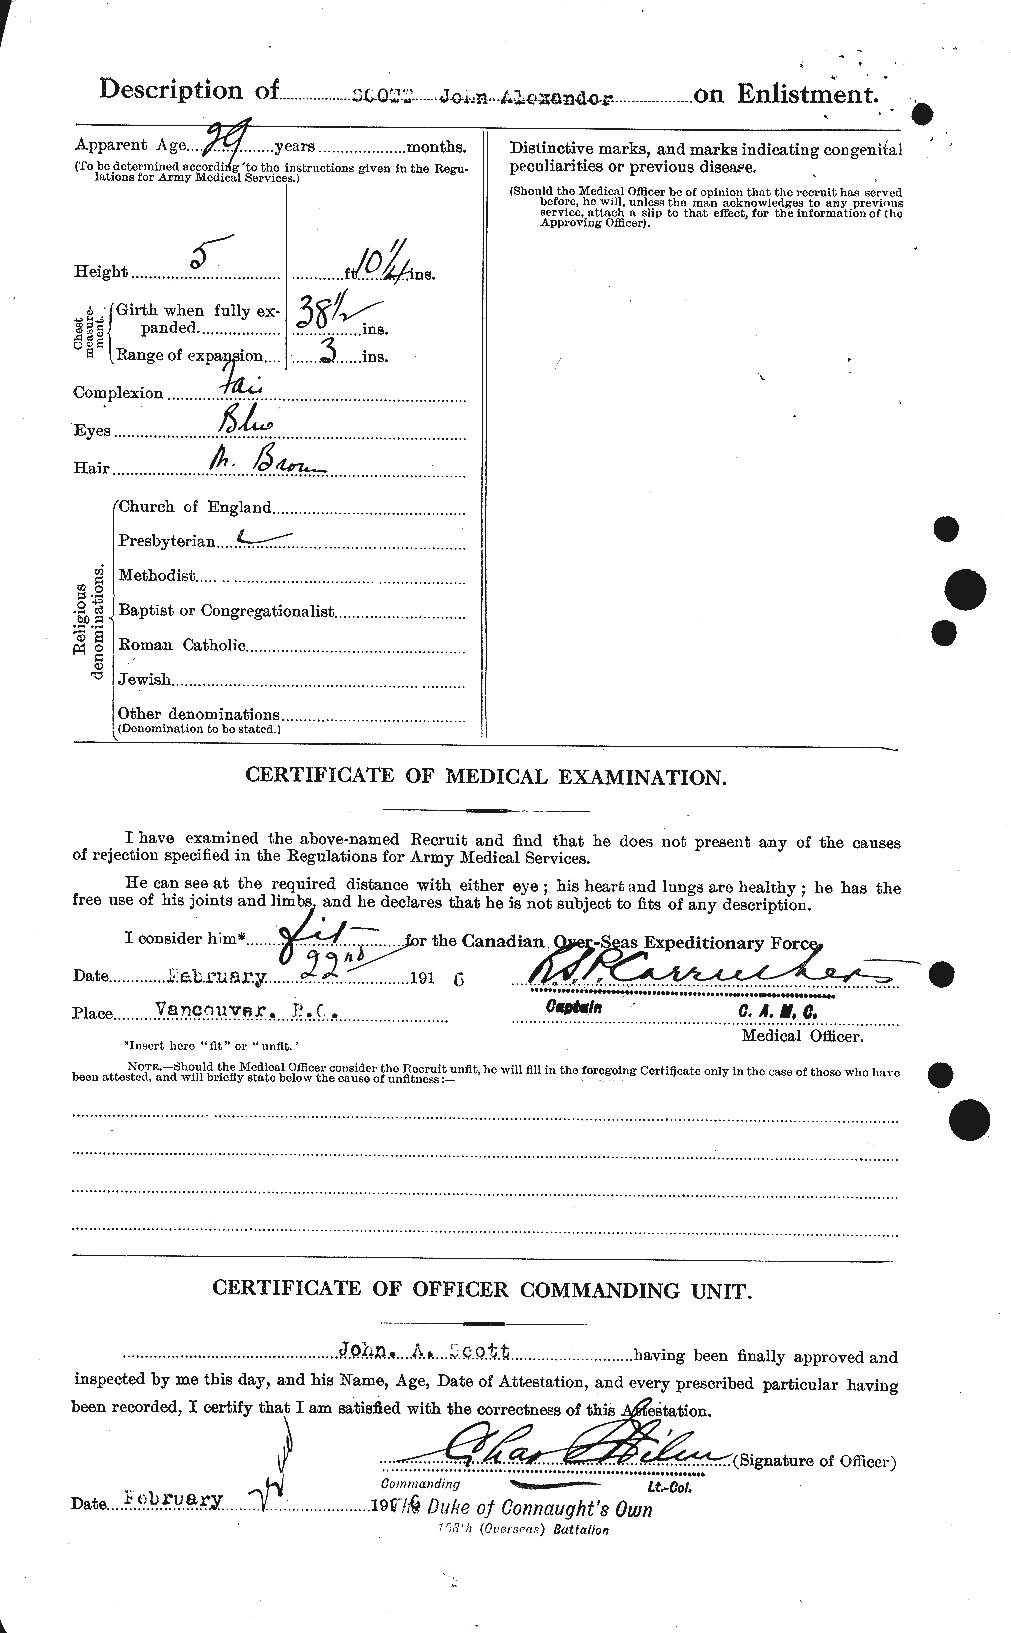 Personnel Records of the First World War - CEF 084665b